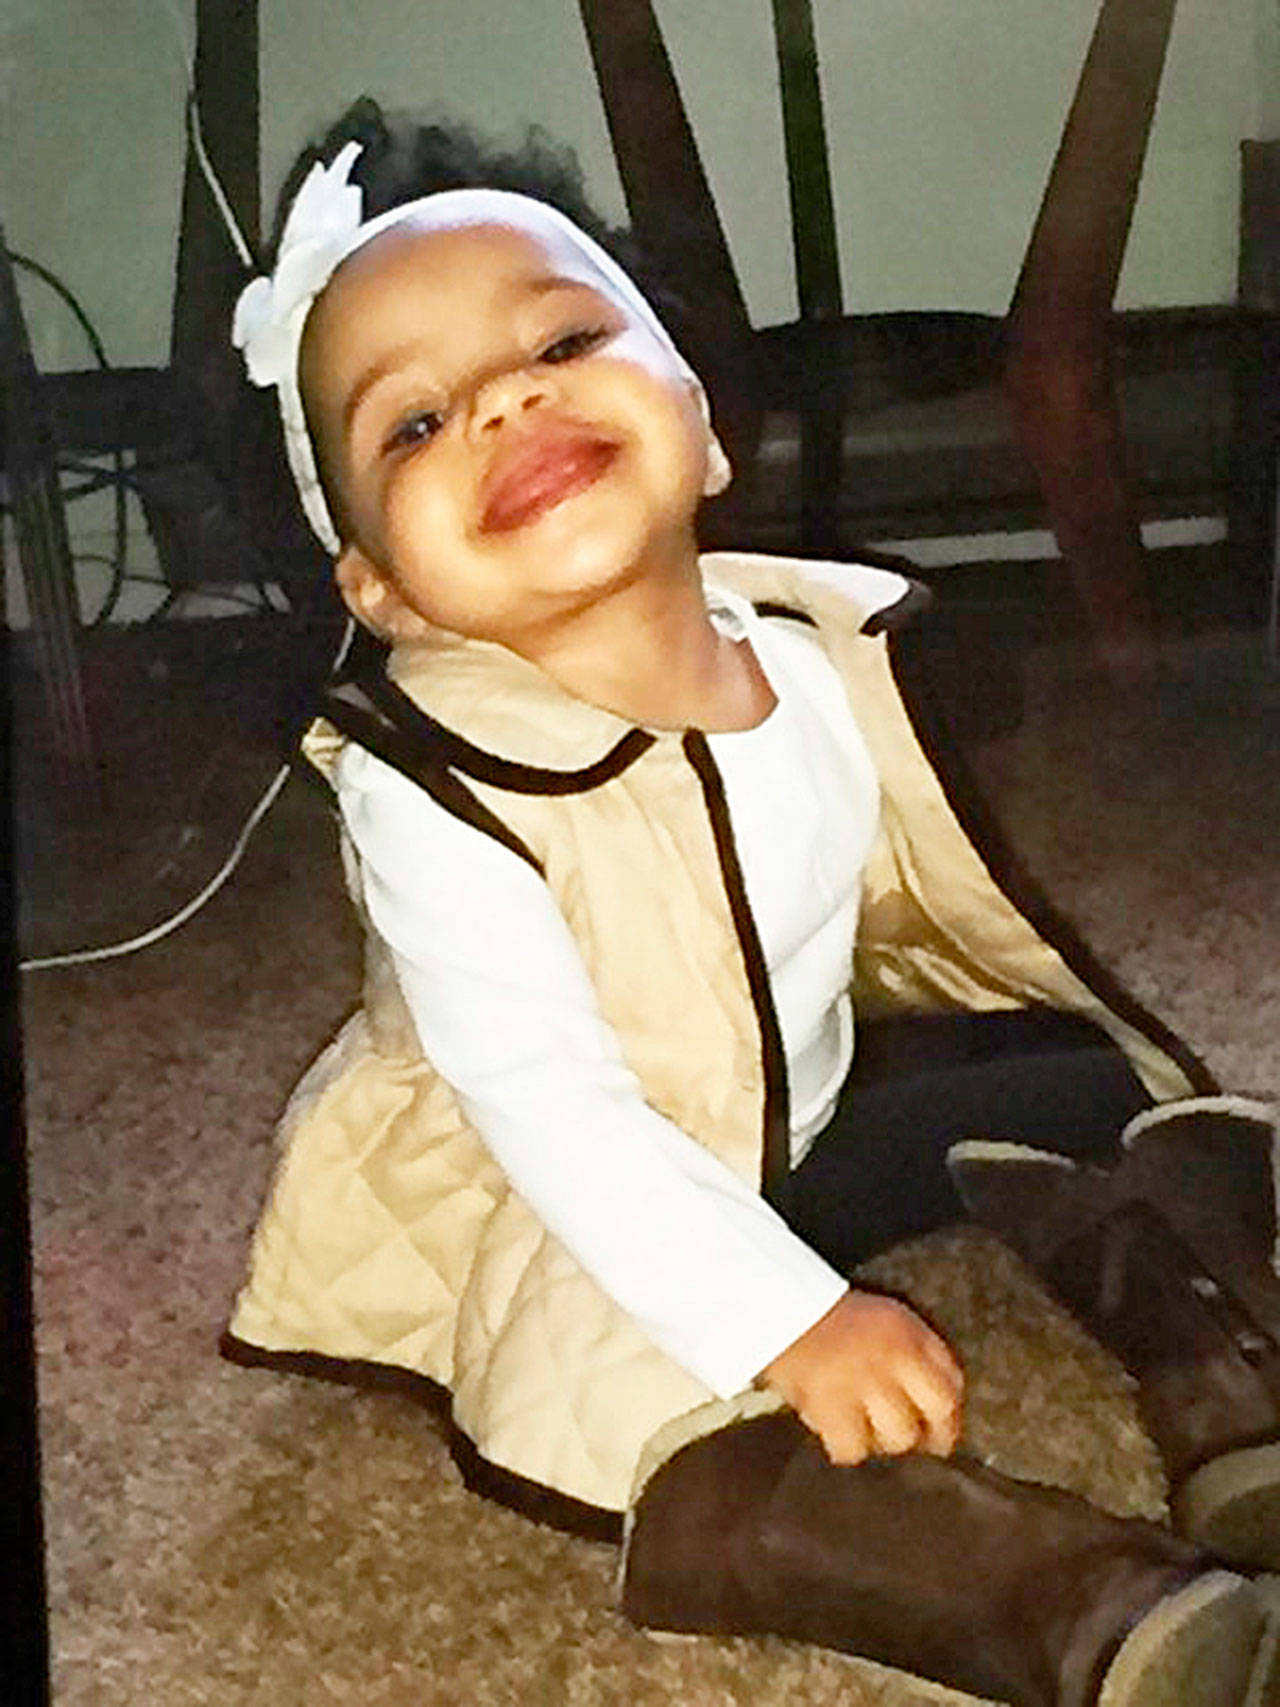 Malijah Grant, 1, was fatally shot in Kent in April 2015 during a drive-by shooting. COURTESY PHOTO